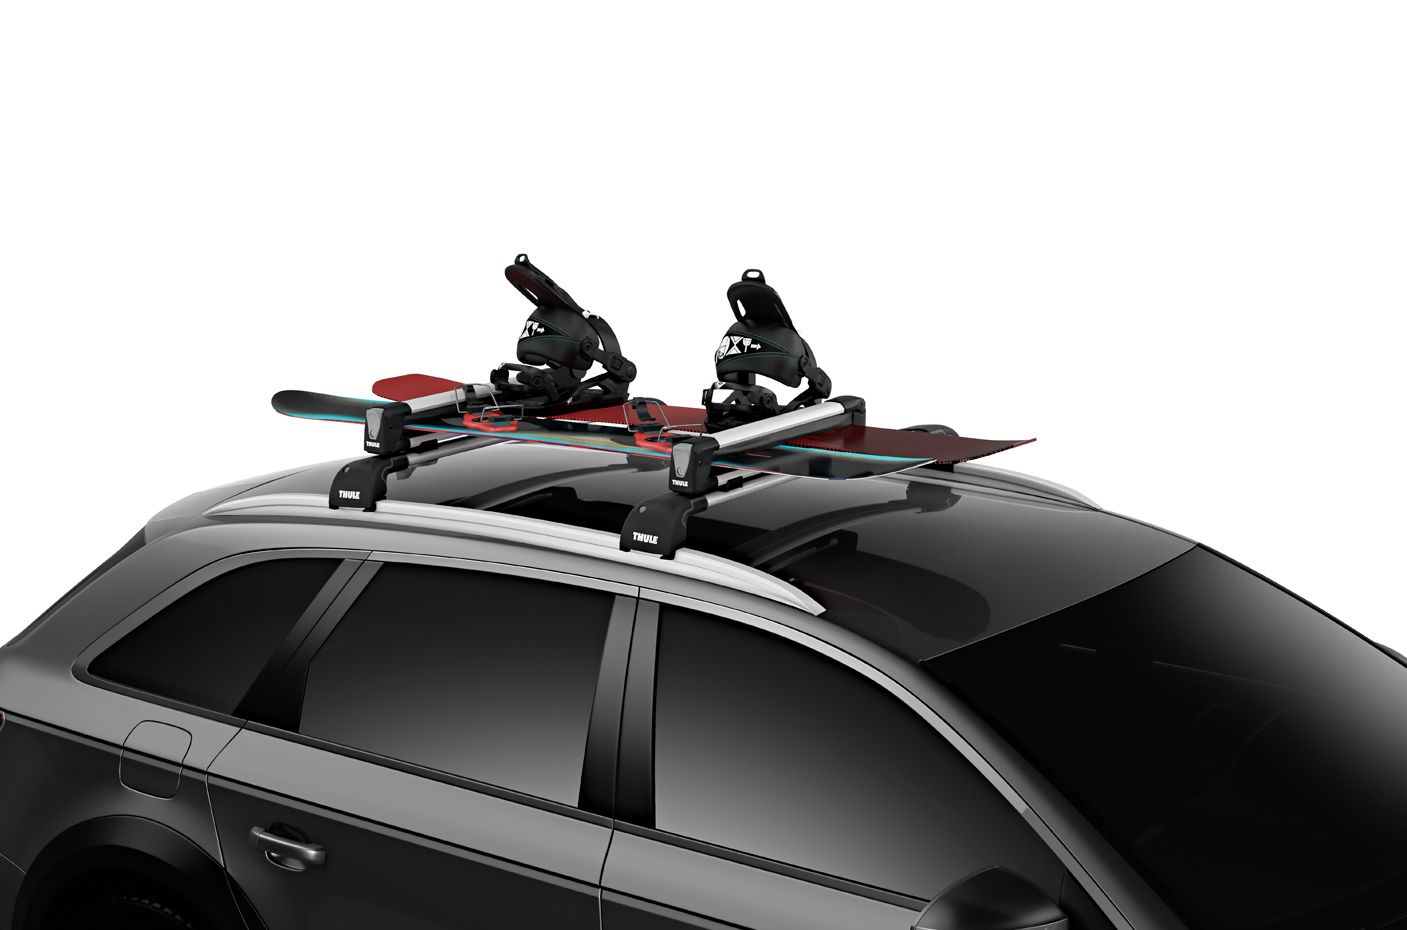 Thule SnowPack on car and snowboards